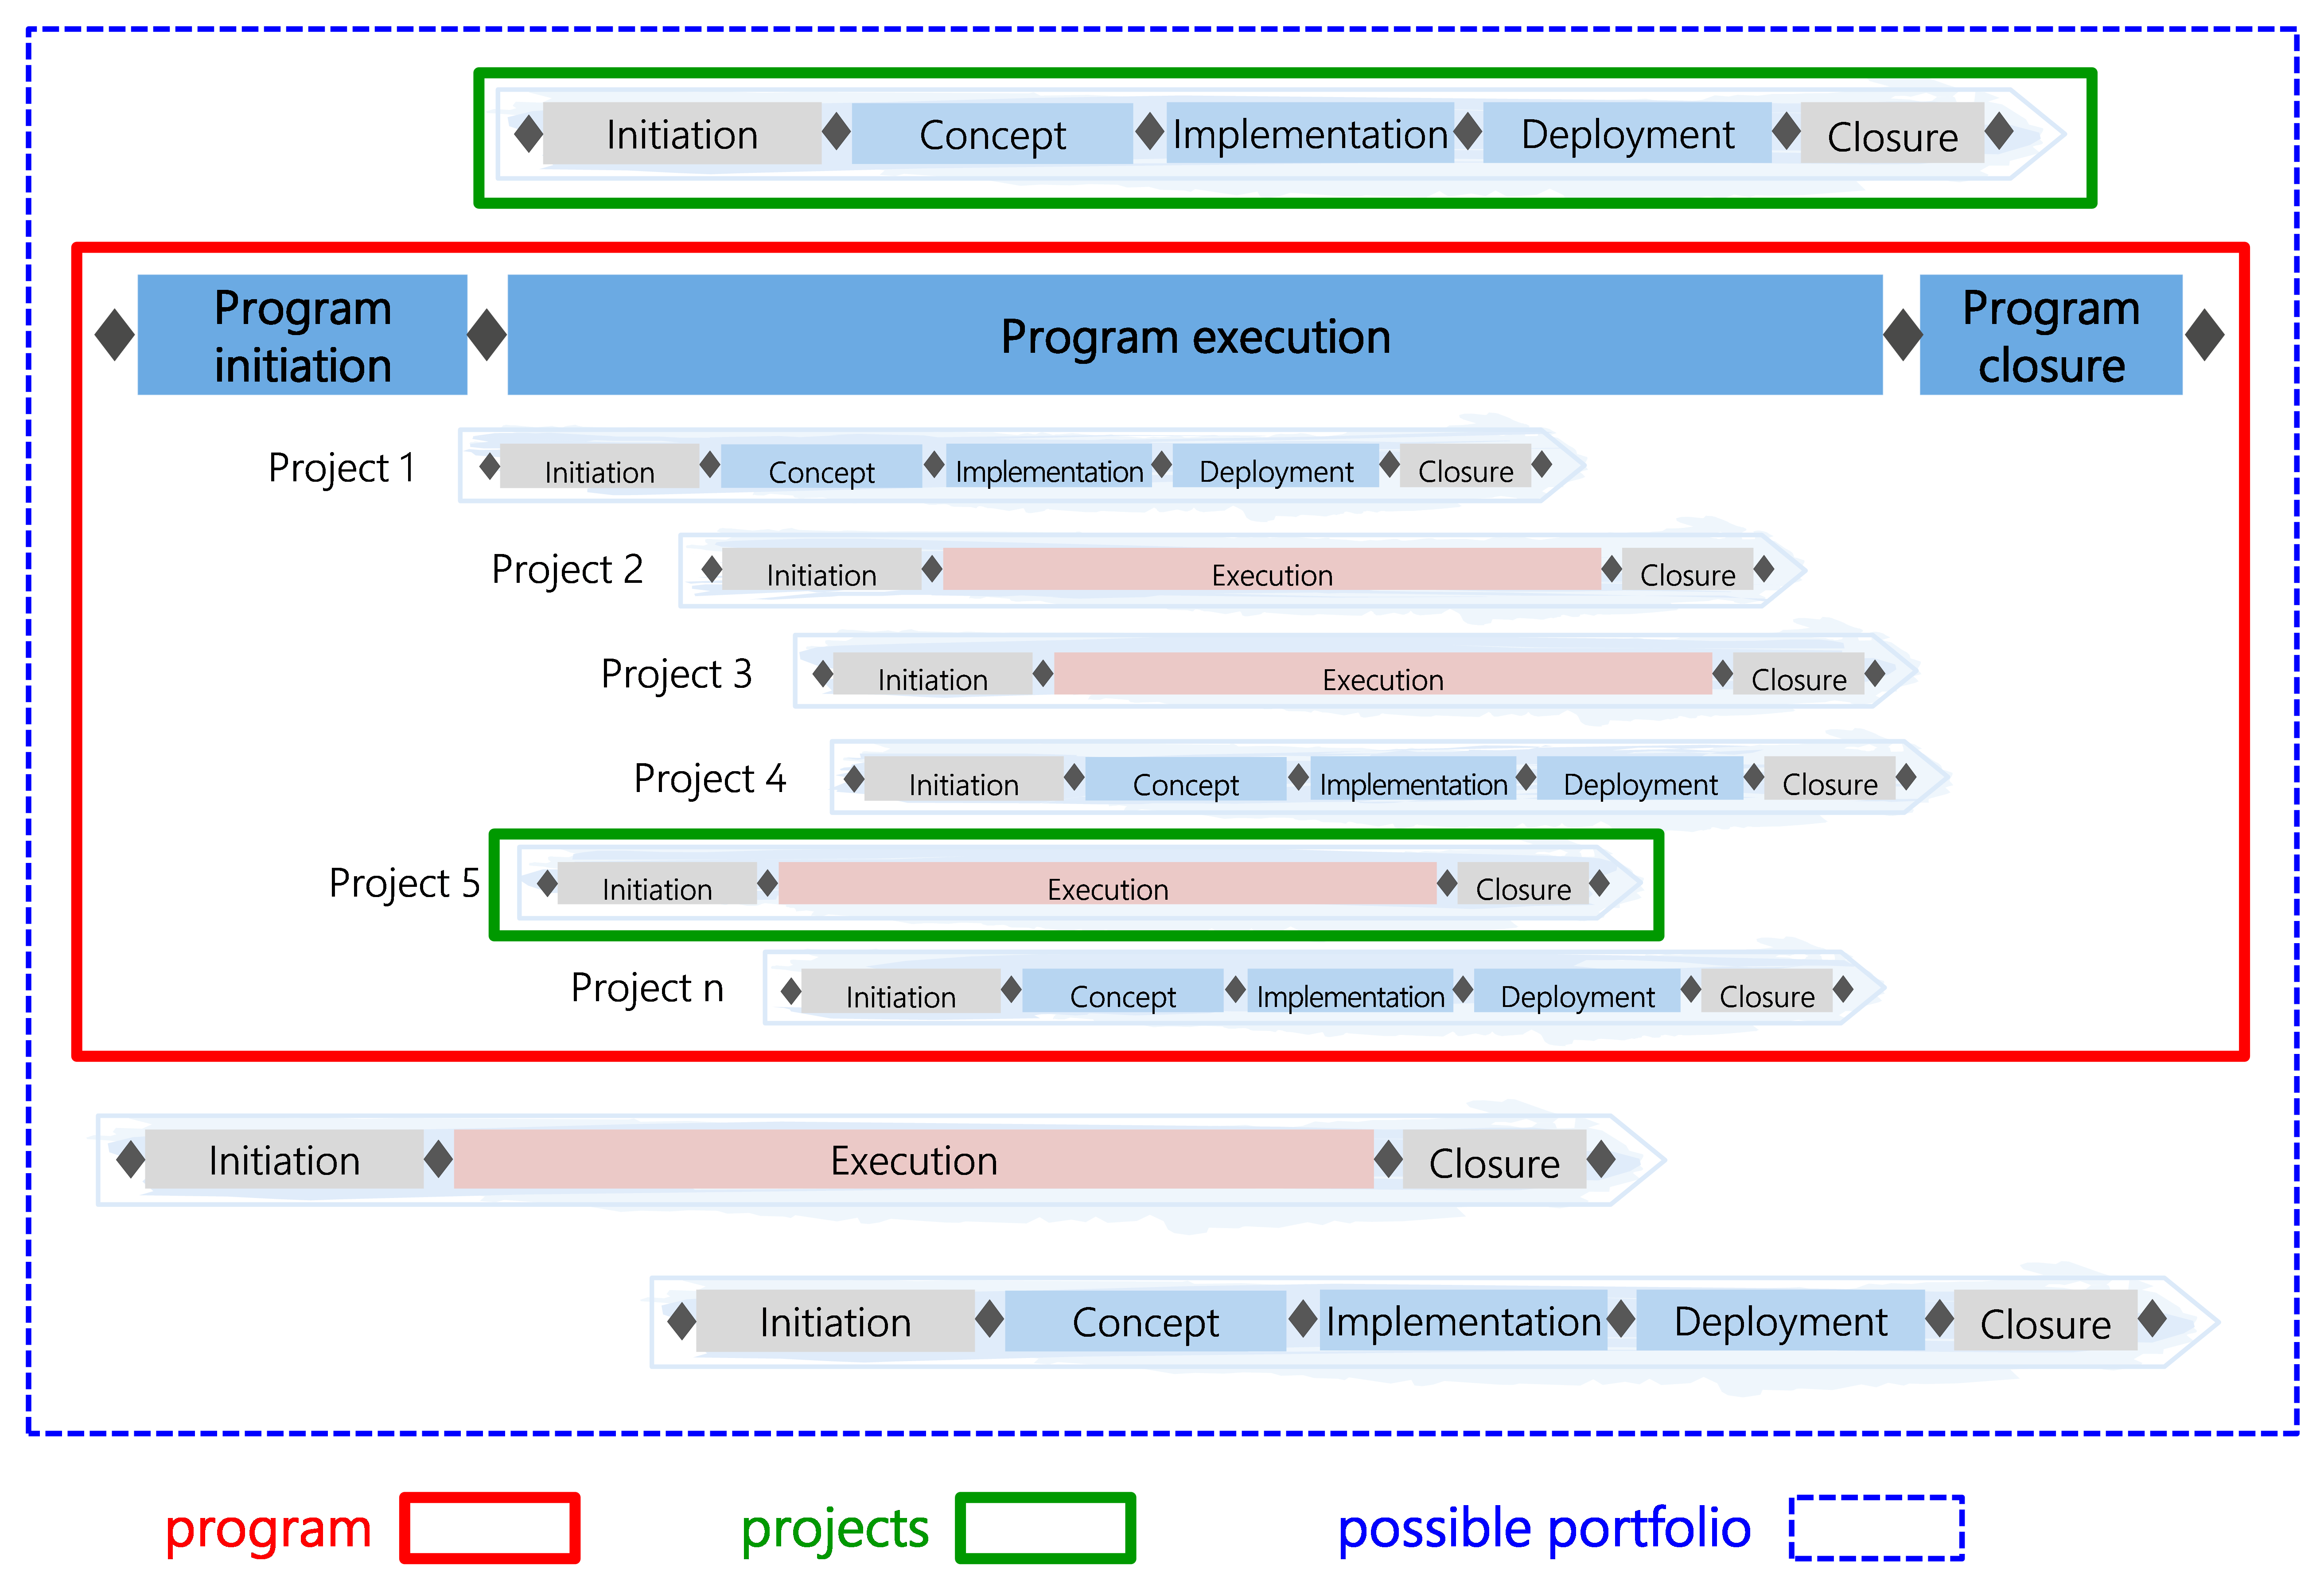 Figure 4: Simultaneous management of projects and programs in a core organization